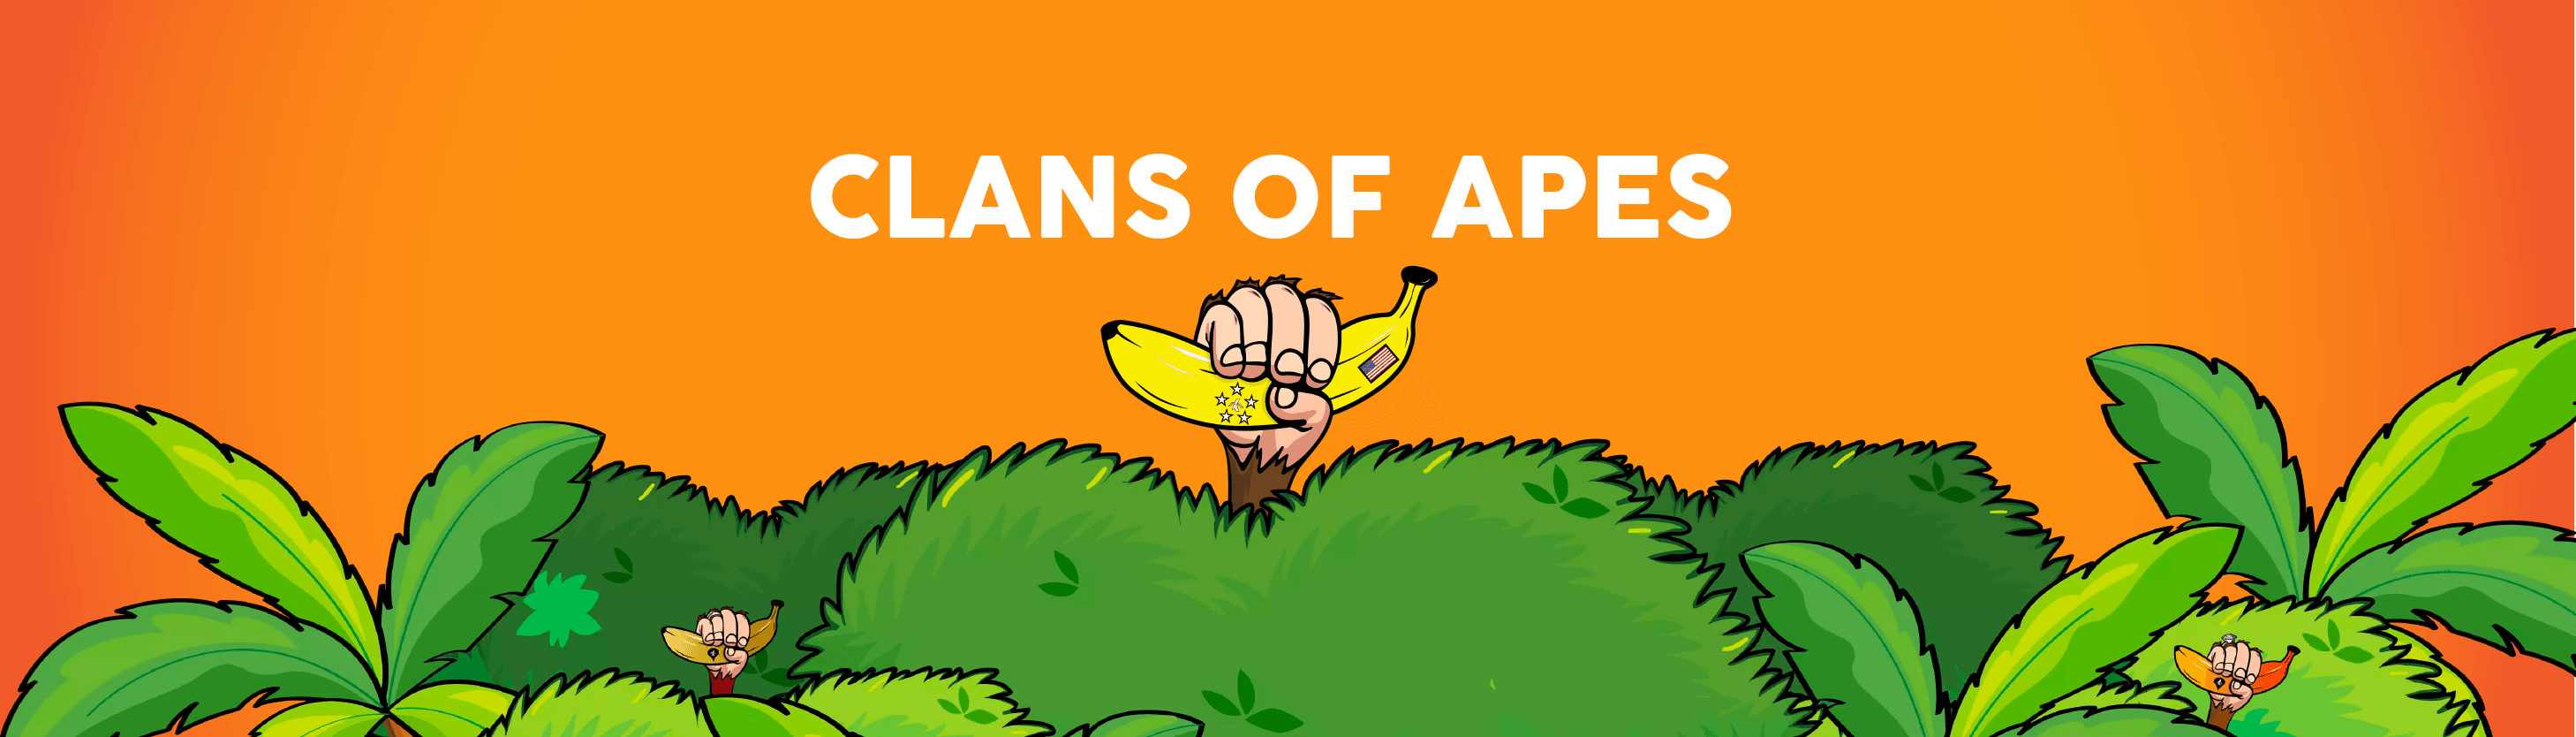 Clans of Apes